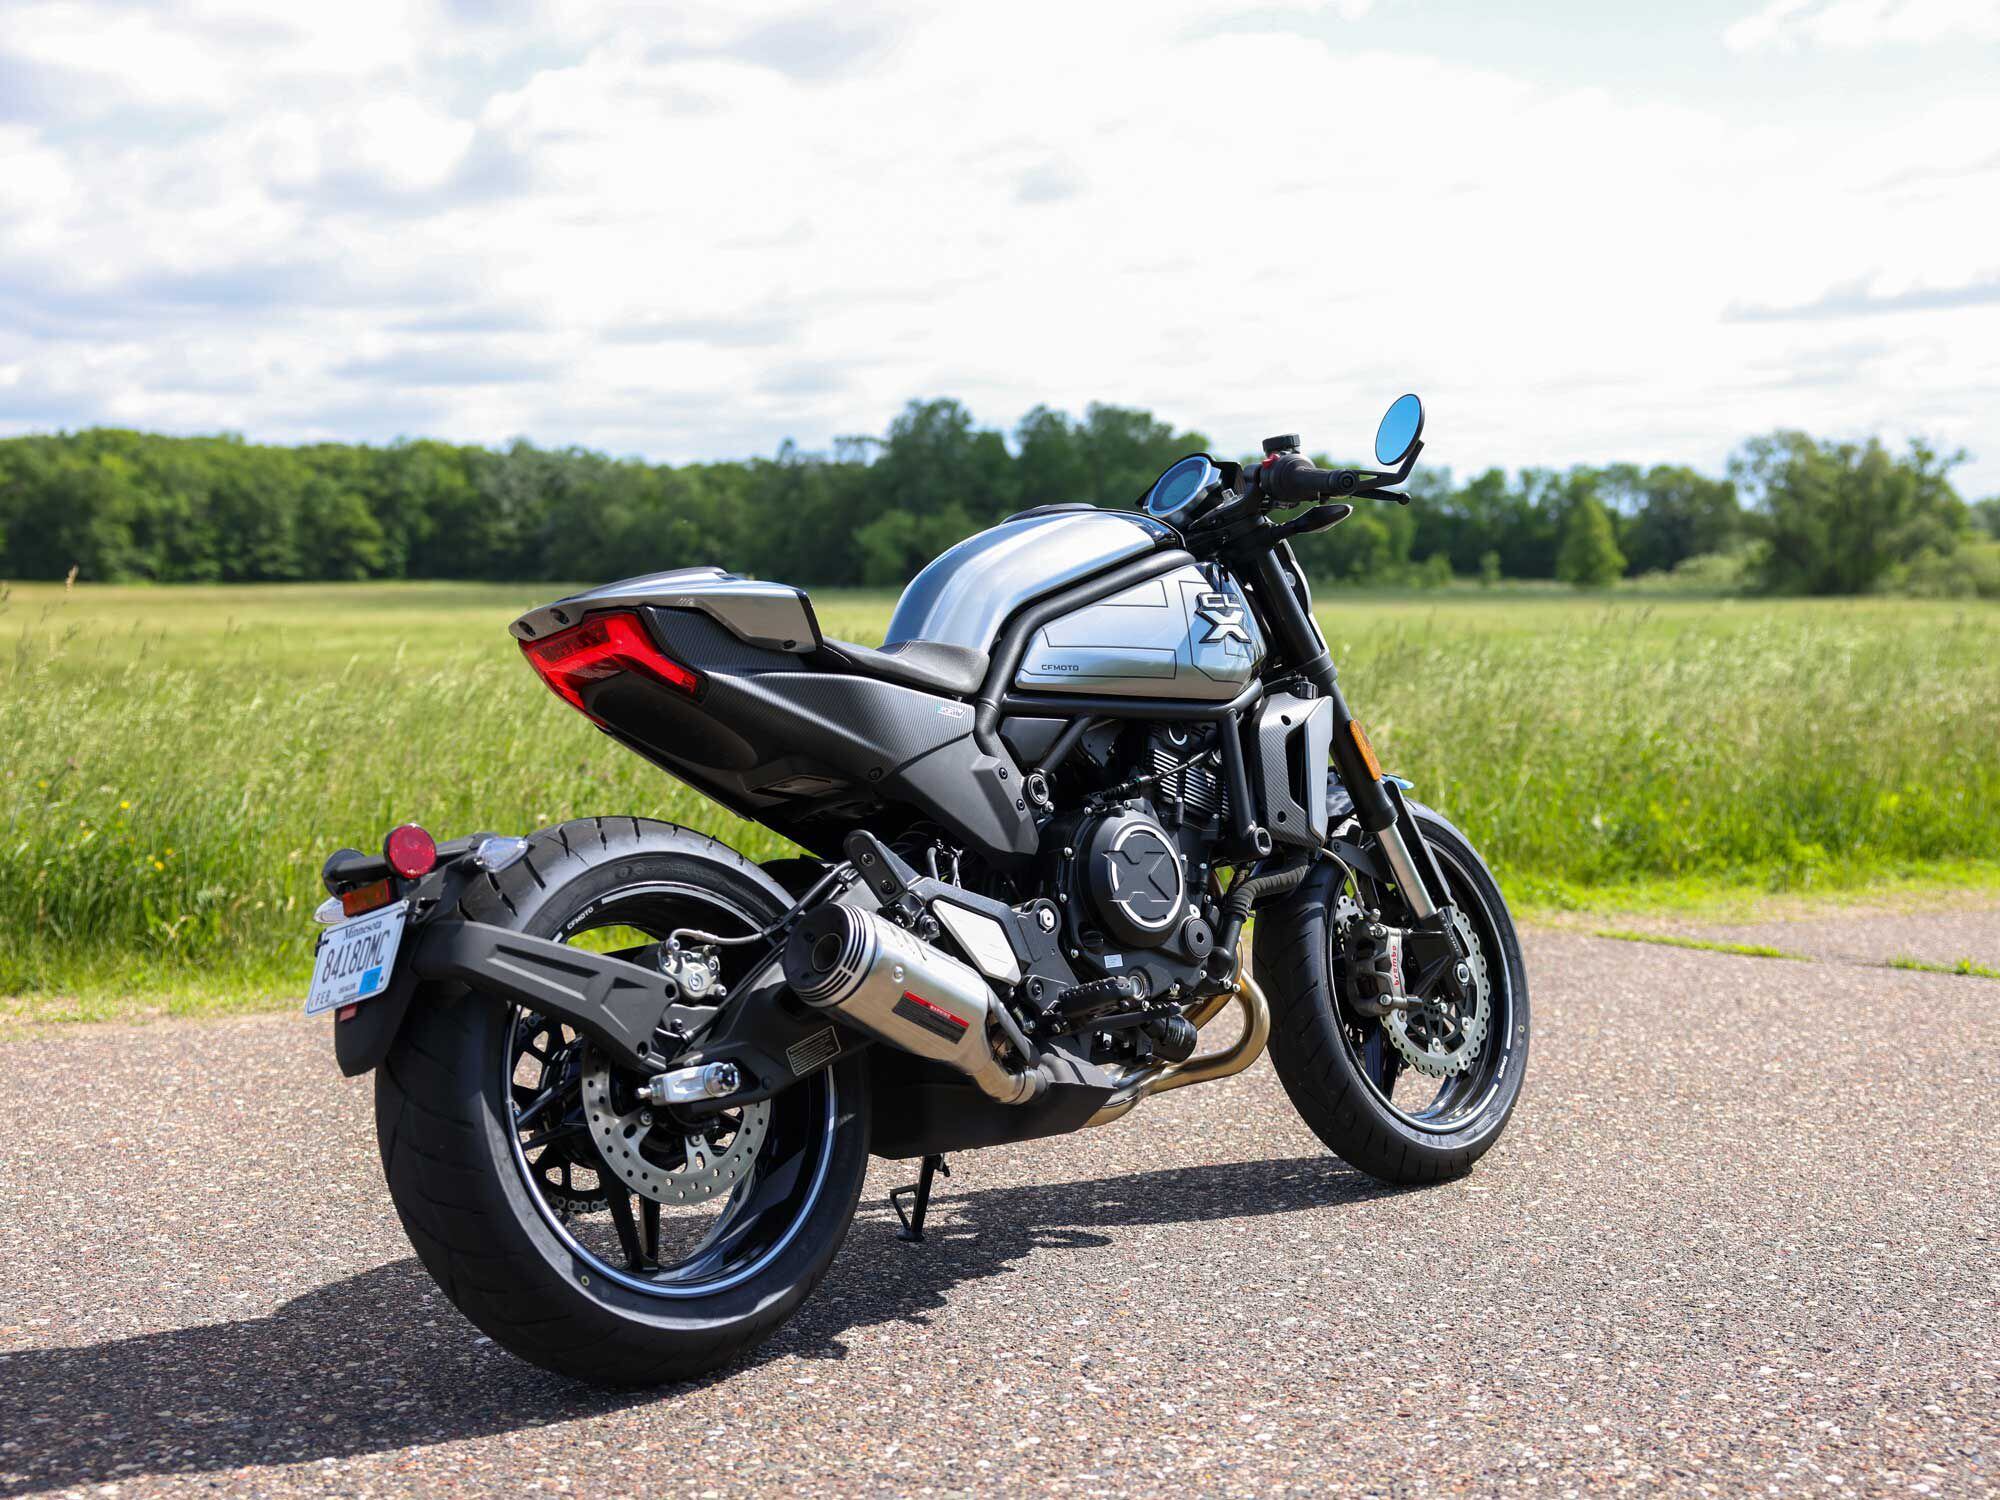 There's no denying the attractiveness of the exhaust pipe on the 700CL-X Sport.